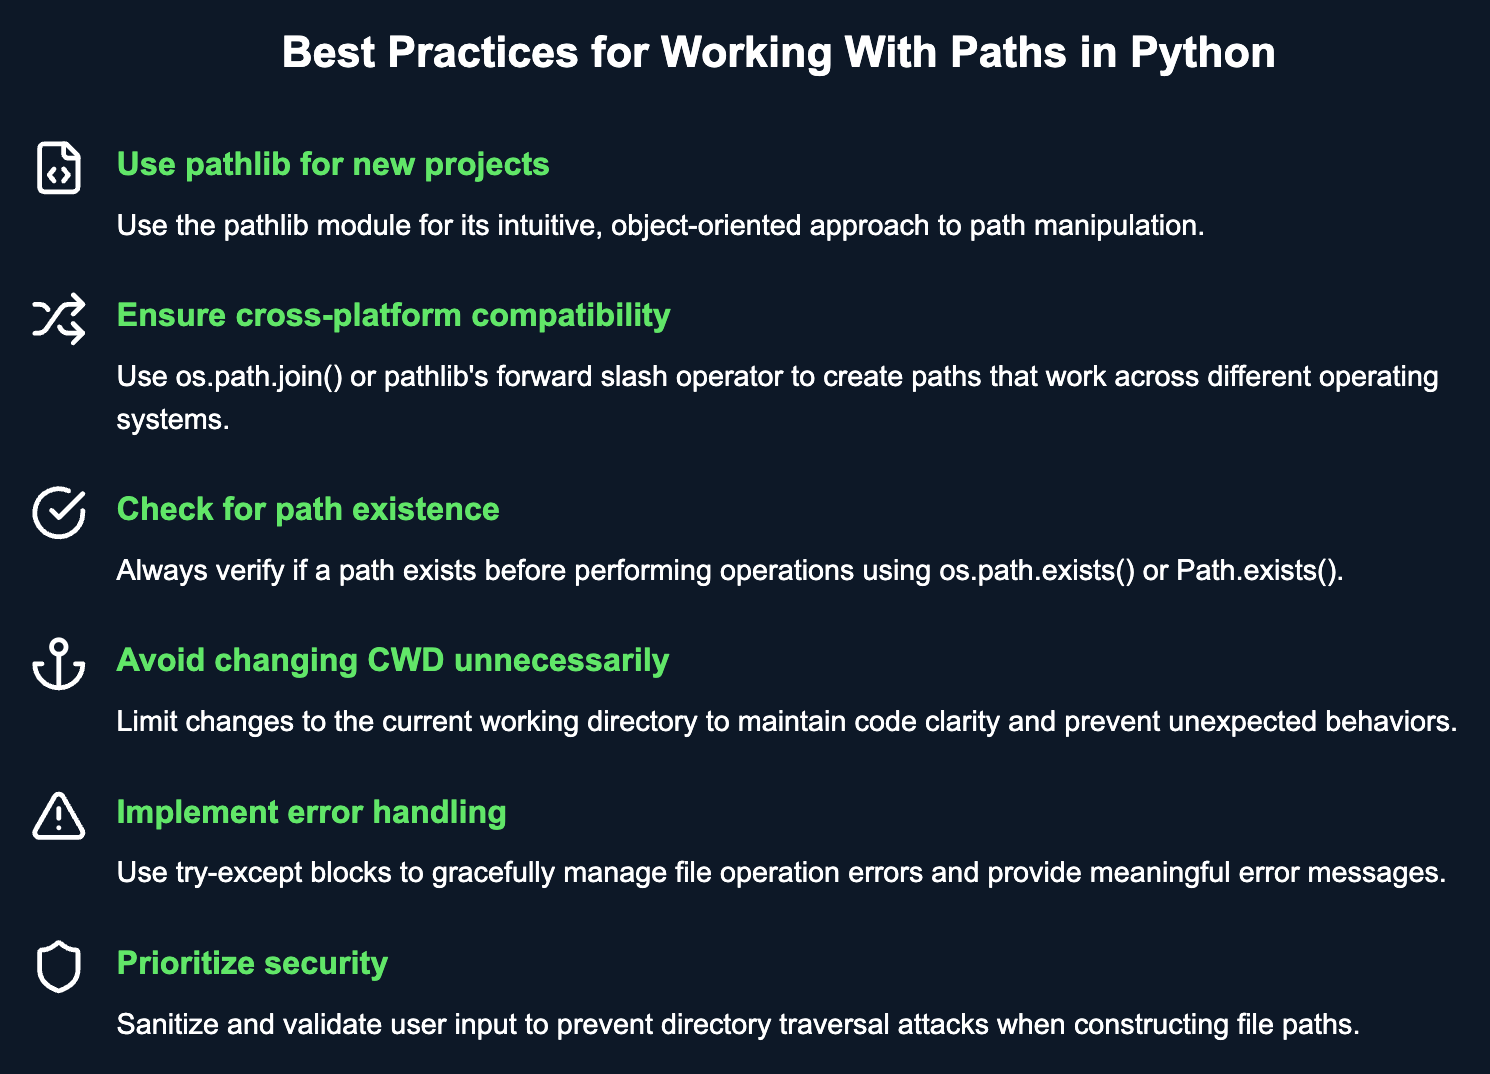 Best Practices for Working With Paths in Python